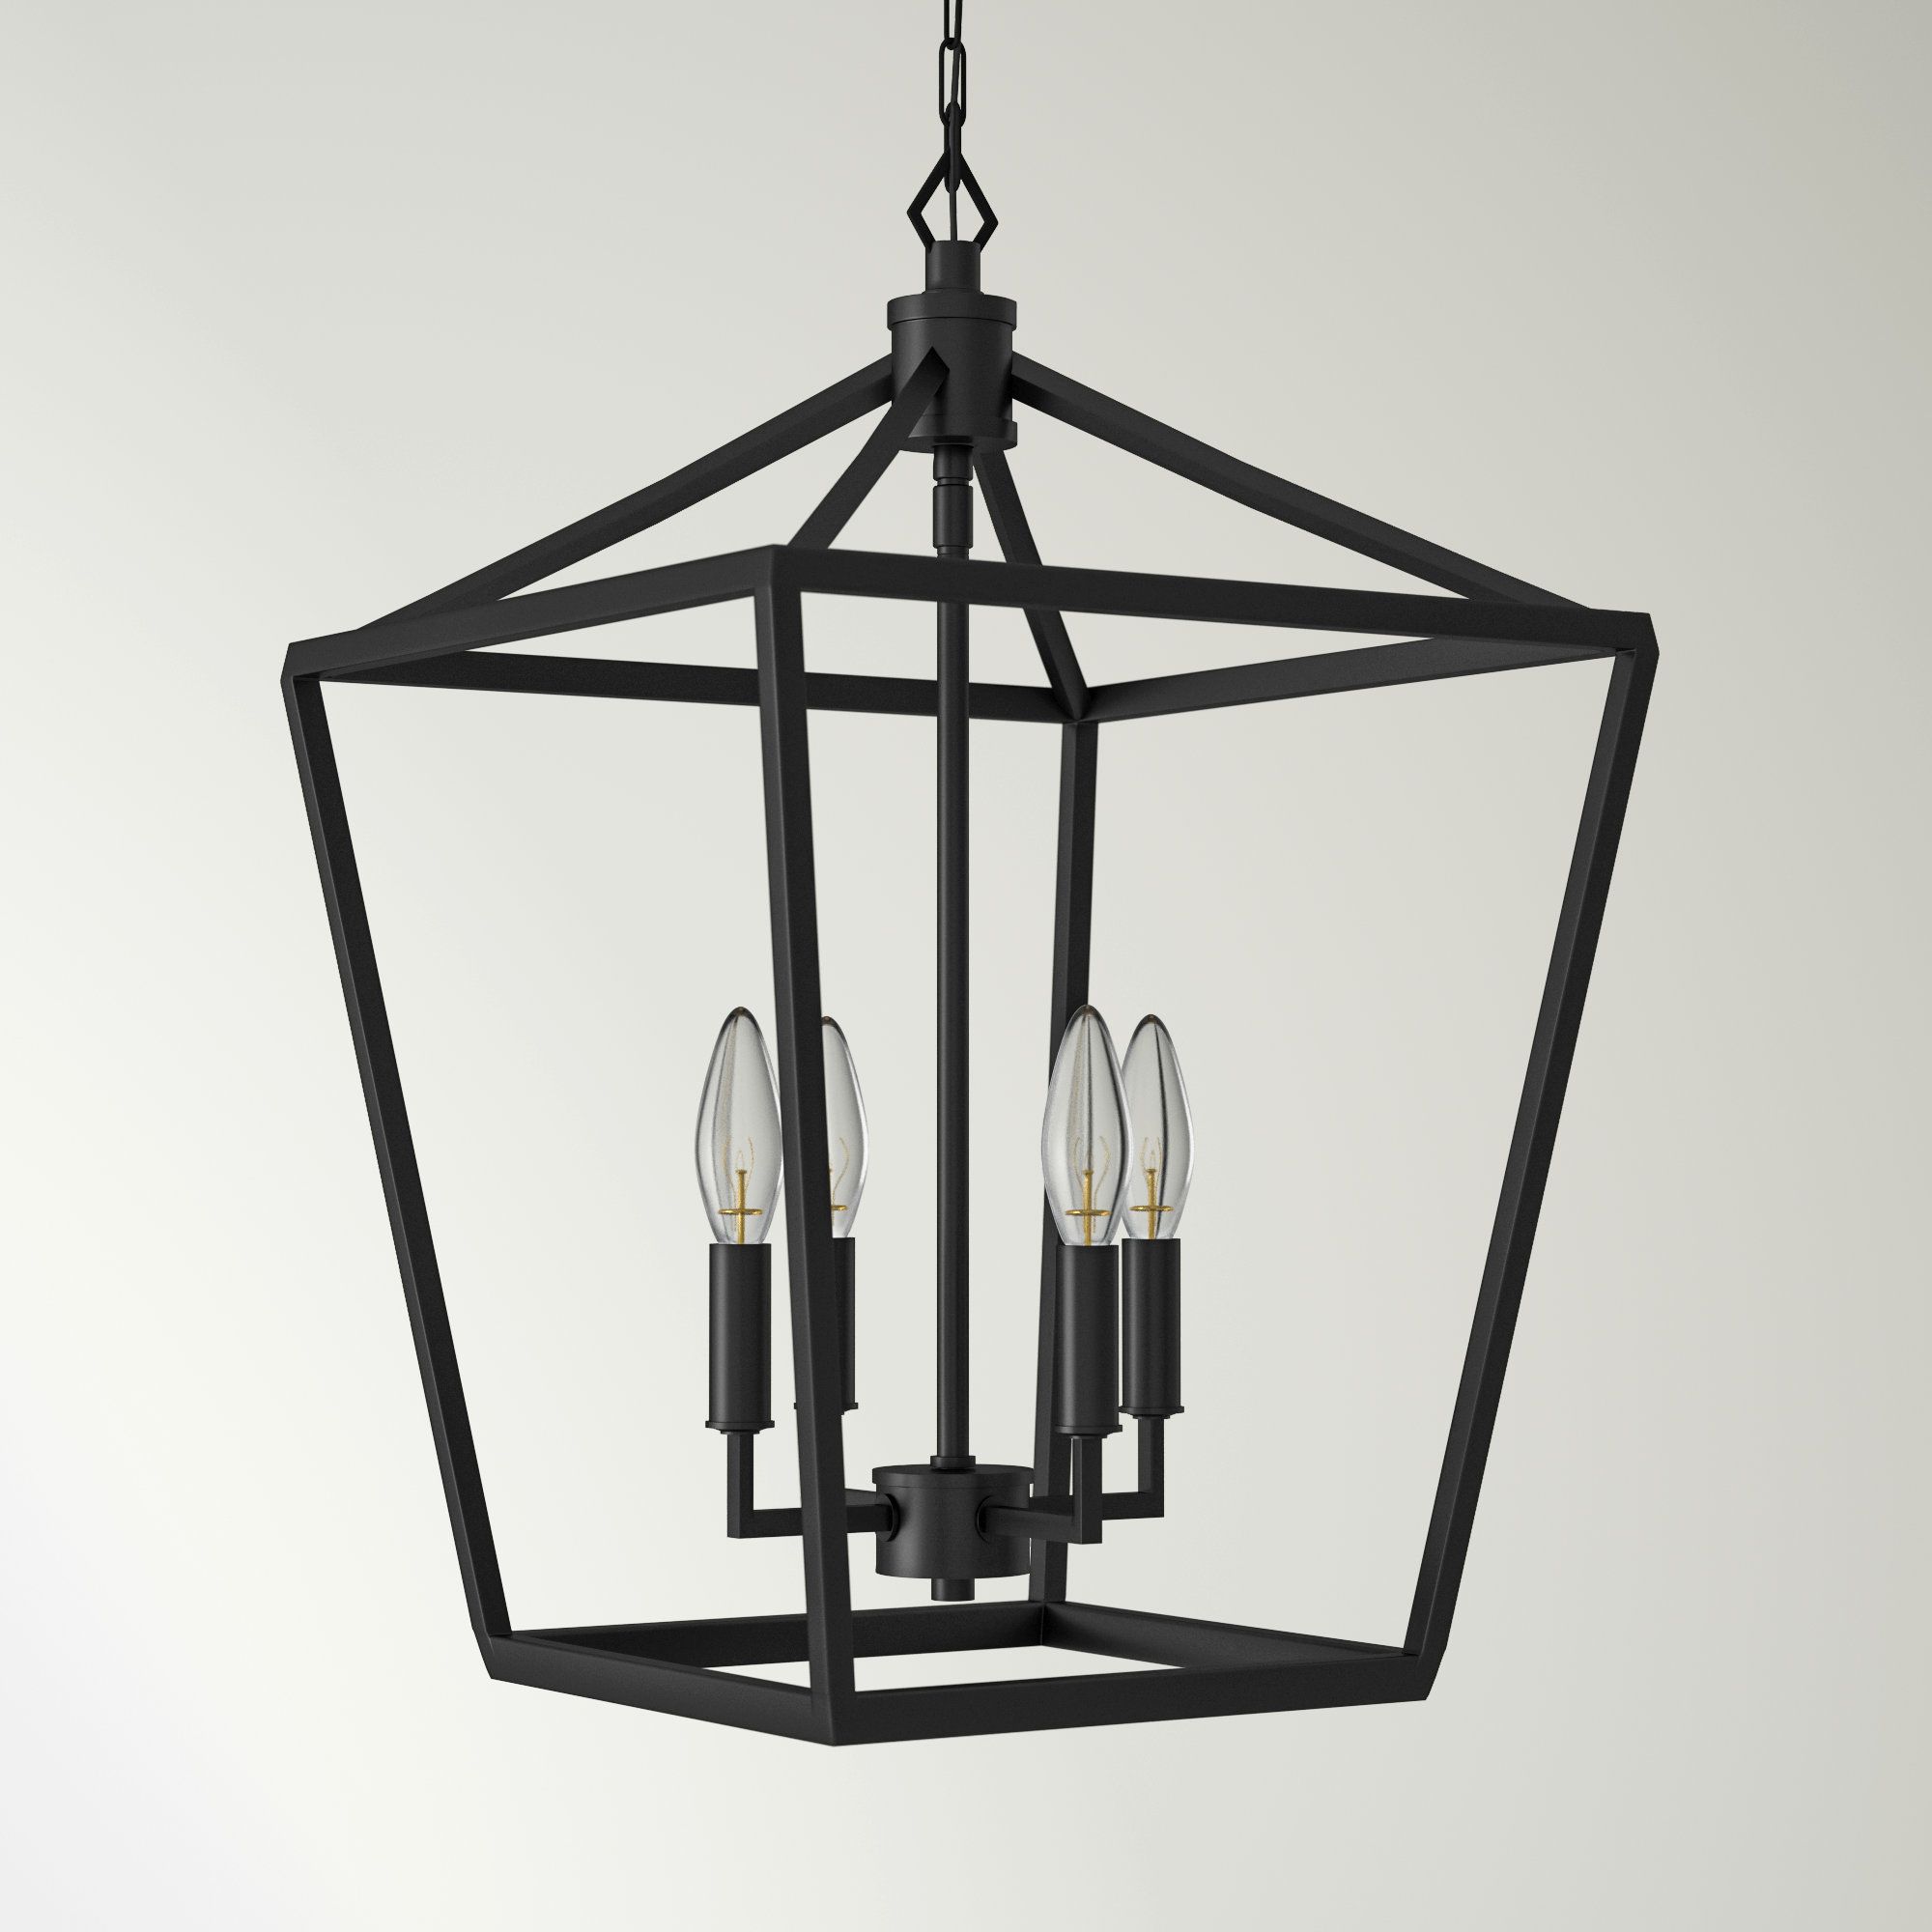 Four Light Lantern Chandeliers Throughout Newest Andover Mills™ Poisson 4 – Light Lantern Geometric Pendant & Reviews (View 3 of 15)